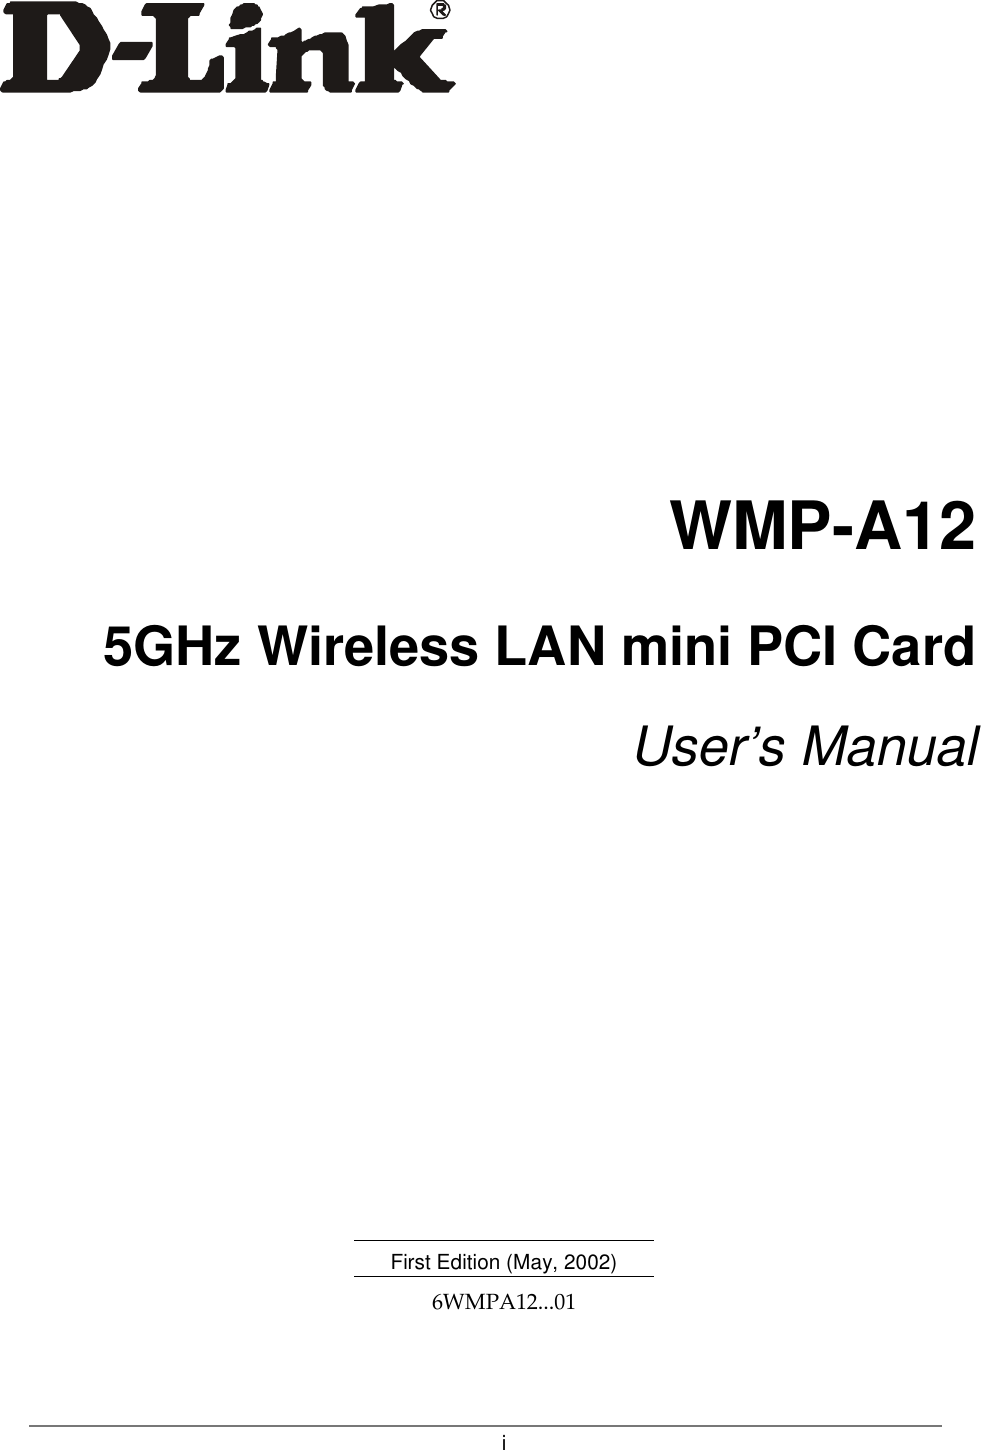 iWMP-A125GHz Wireless LAN mini PCI CardUser’s Manual                                             First Edition (May, 2002)6WMPA12...01